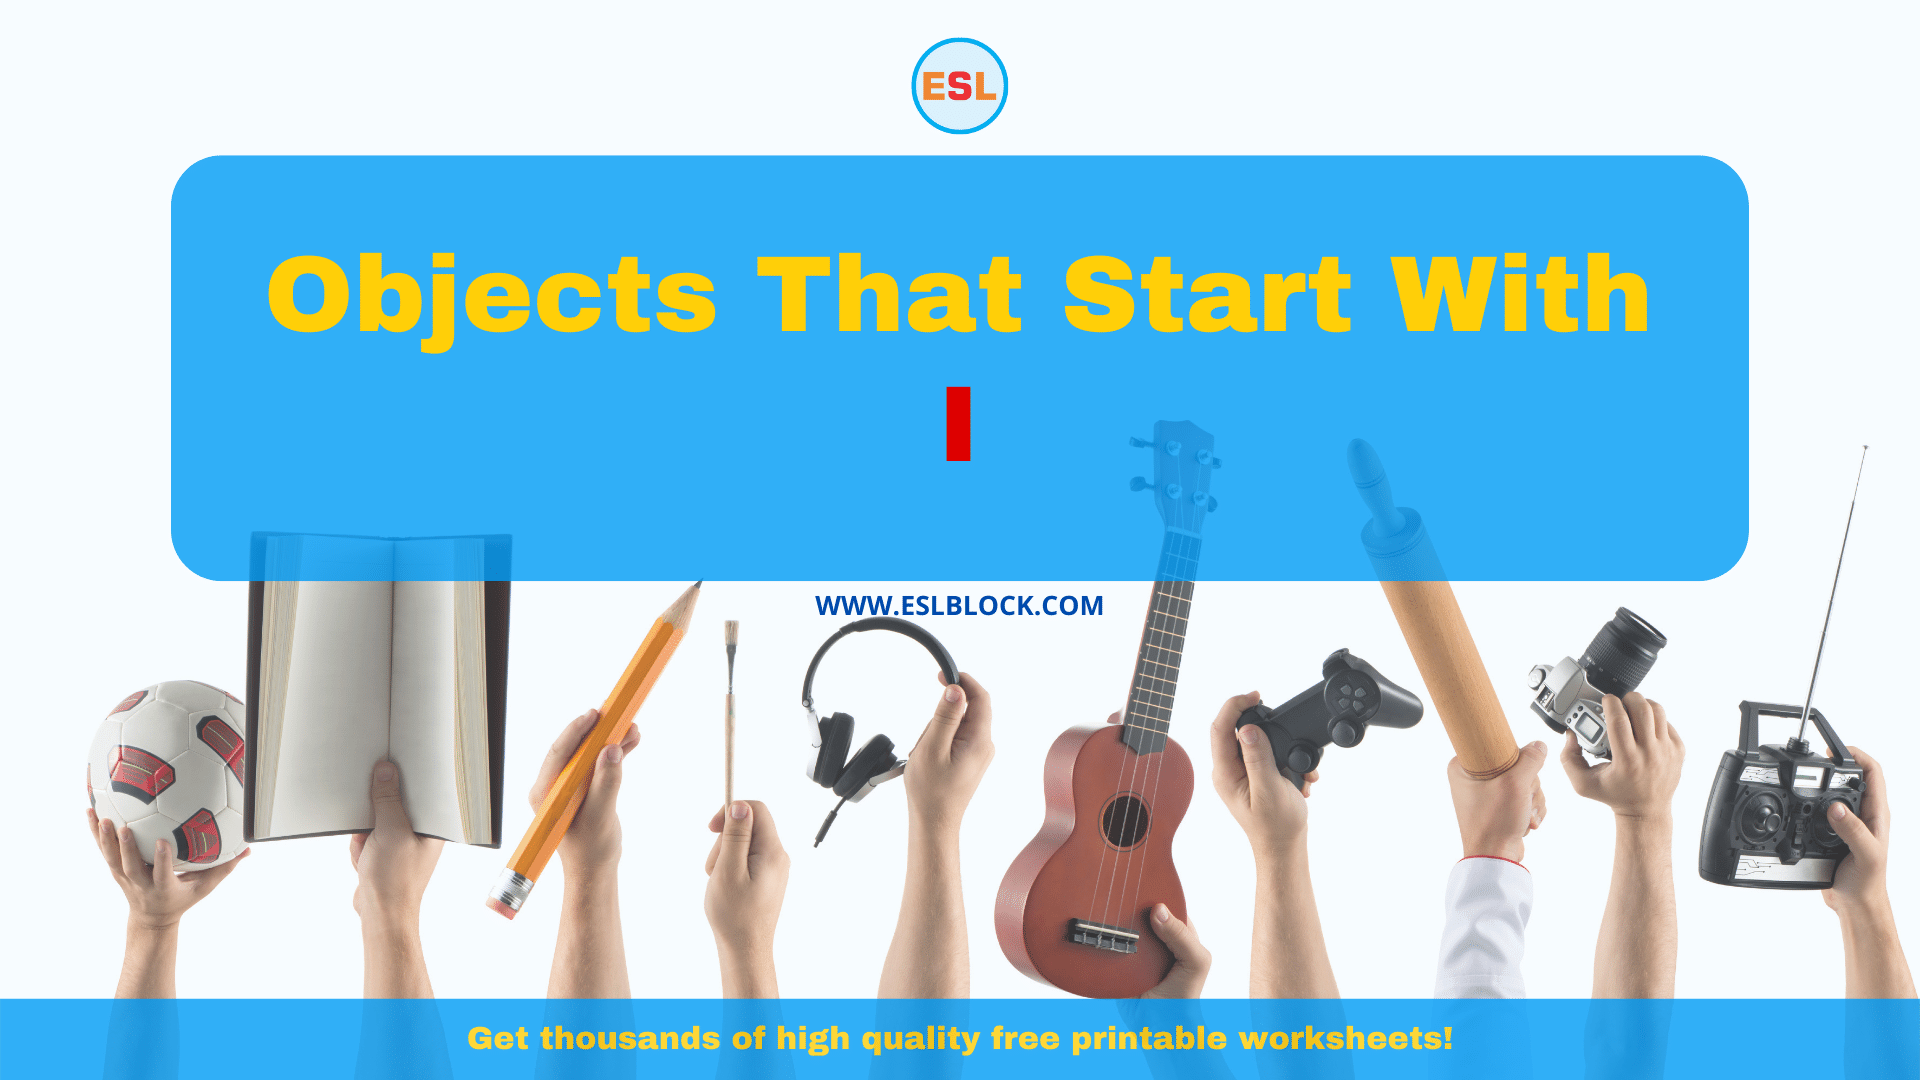 5 Letter Objects Starting With I, English, English Nouns, English Vocabulary, English Words, I Objects, I Objects in English, I Objects Names, List of Objects That Start With I, Nouns, Objects List, Objects That Start With I, Things Names, Vocabulary